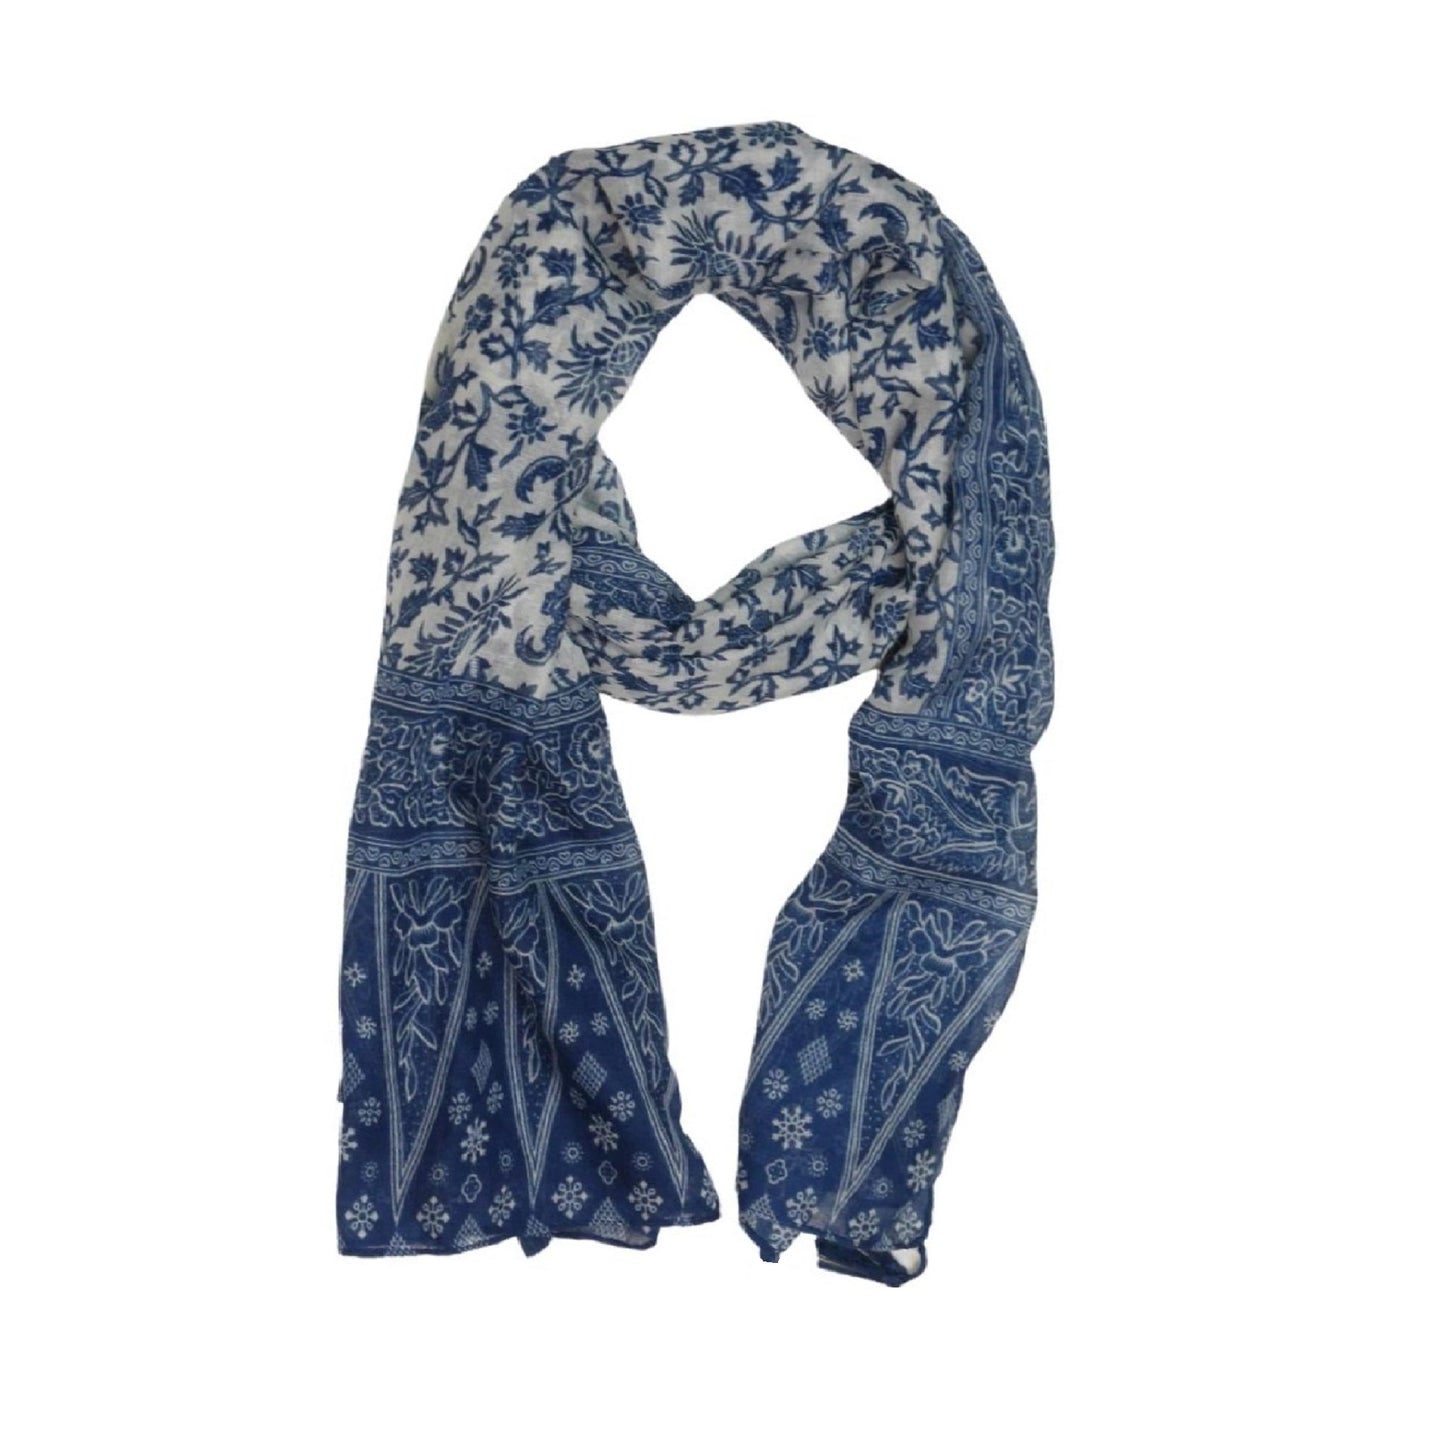 Blue & White Floral Scarf